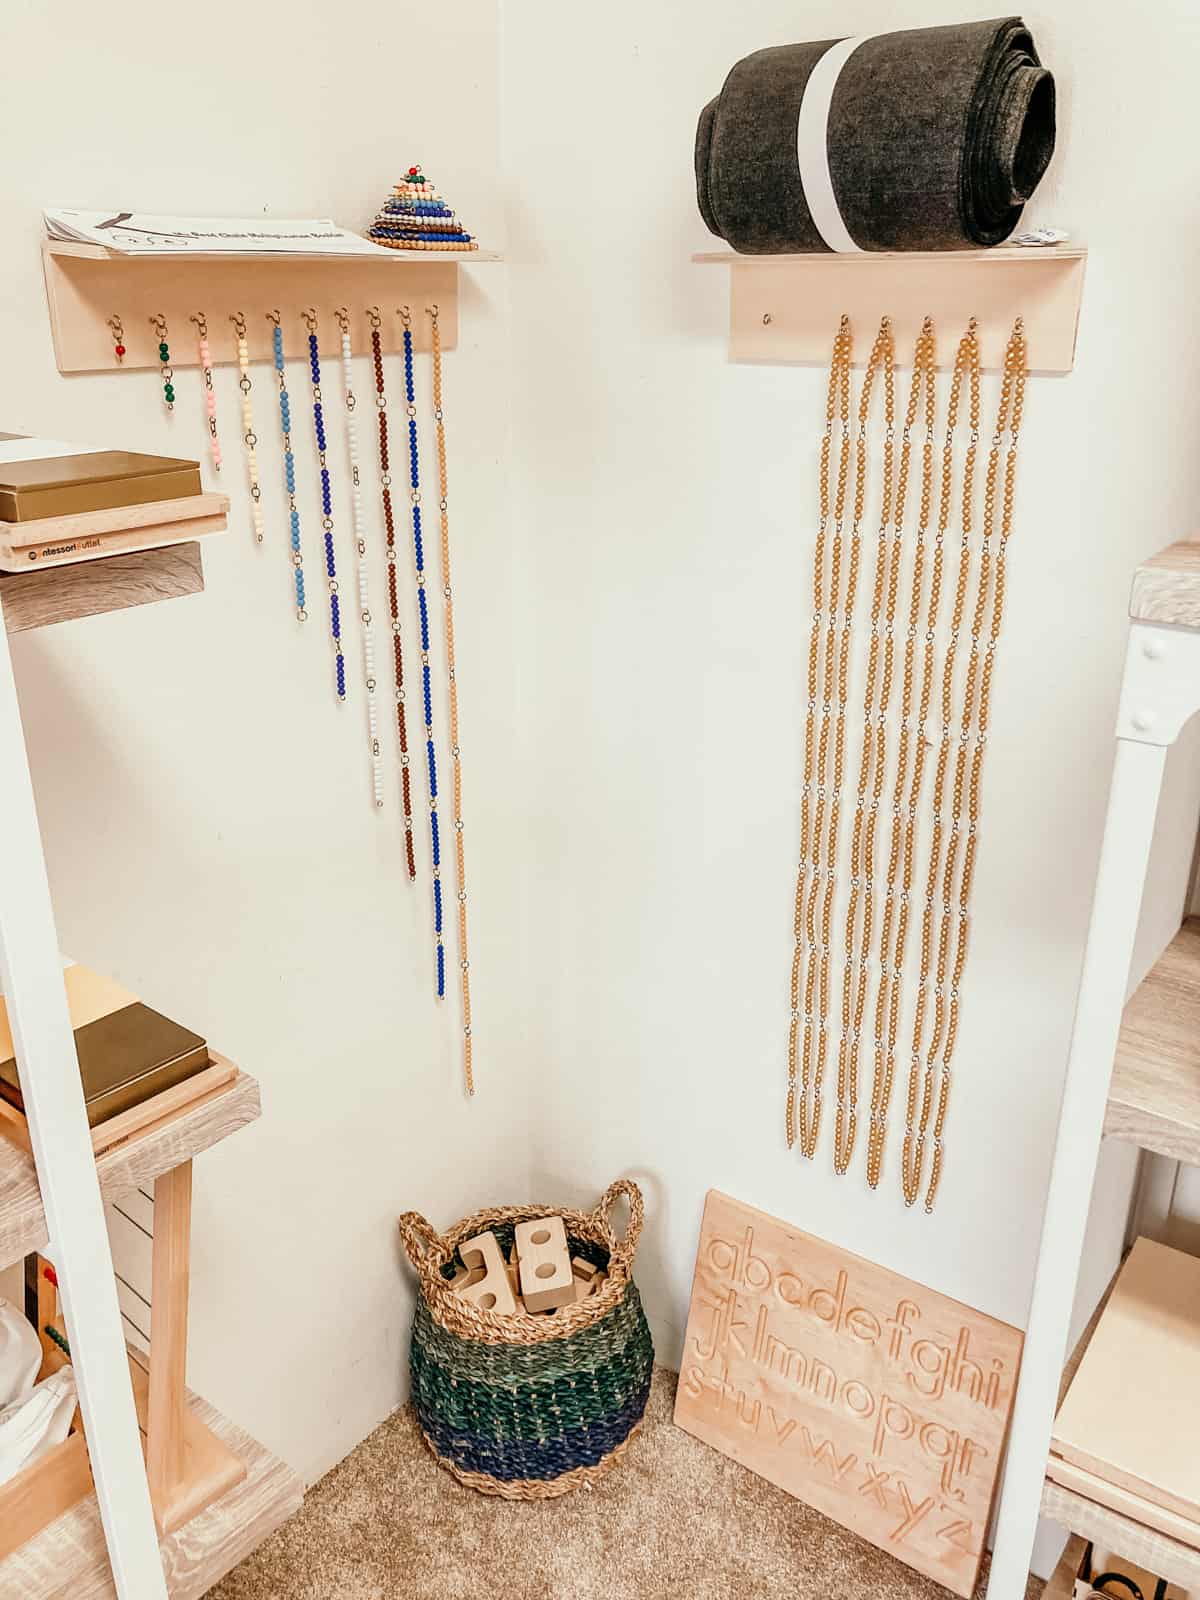 Montessori short bead chains and thousand bead chain hanging on the wall with a basket of sumblox beneath